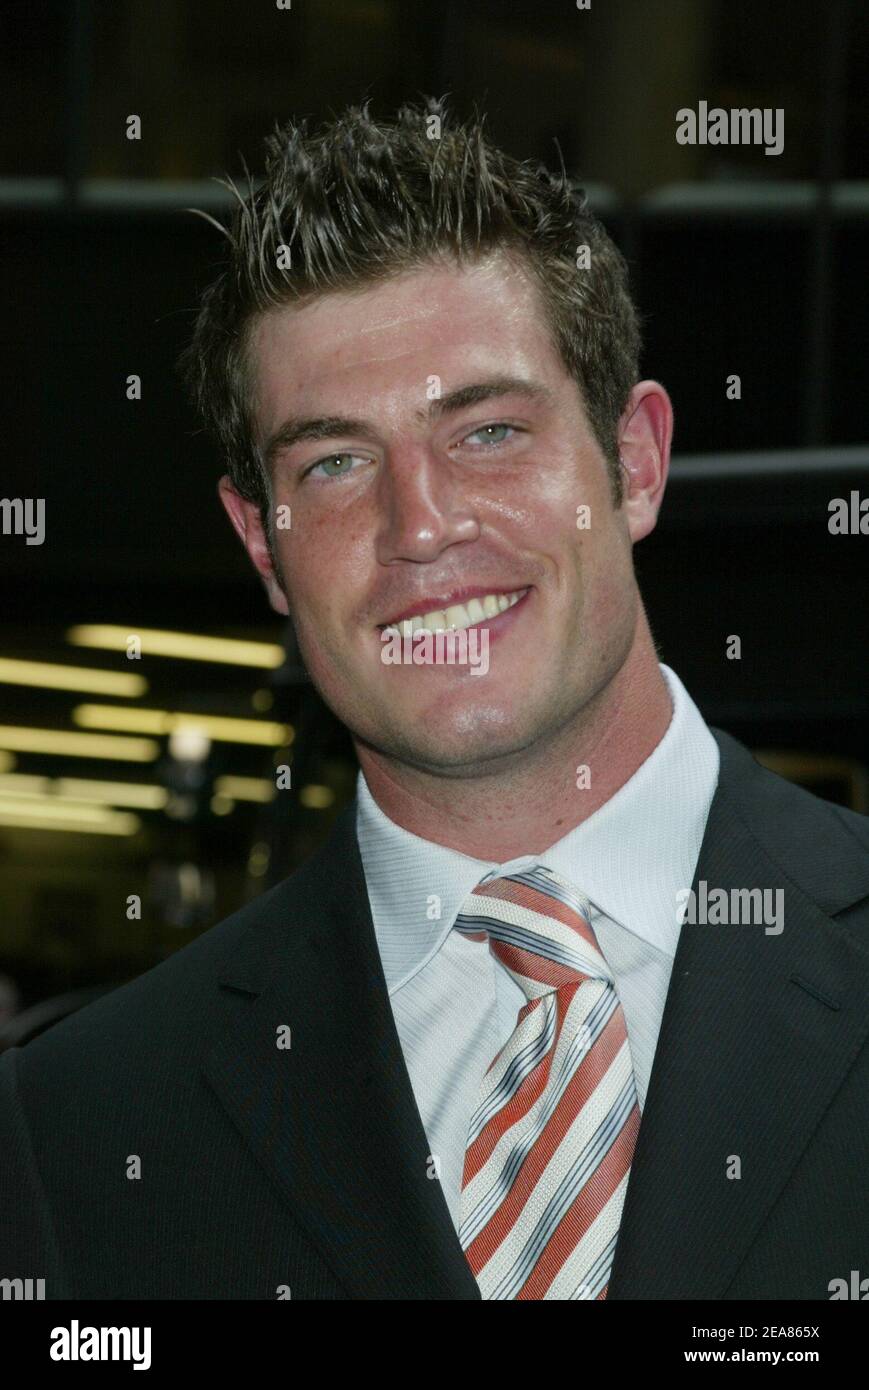 Jesse Palmer, from the Bachelor, attends the 2004 ABC Up-Fronts, held at Cipriani in New York on Tuesday, May 18, 2004. (Pictured: Jesse Palmer). Photo by SWF/ABACA Stock Photo